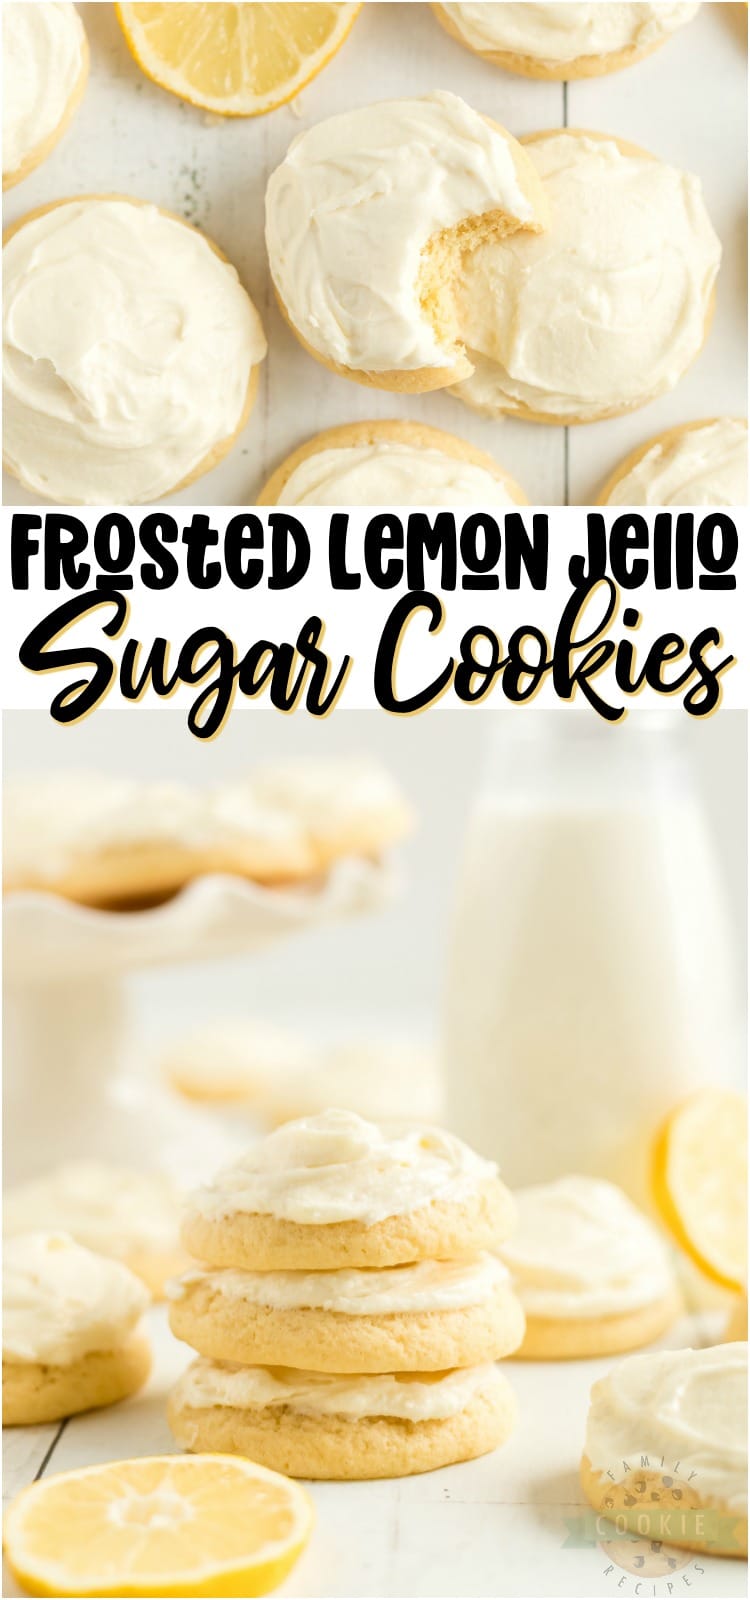 Lemon Jello Sugar Cookies are delicious cookies made with lemon jello! Easy sugar cookie recipe with a simple buttercream frosting perfect for lemon lovers.